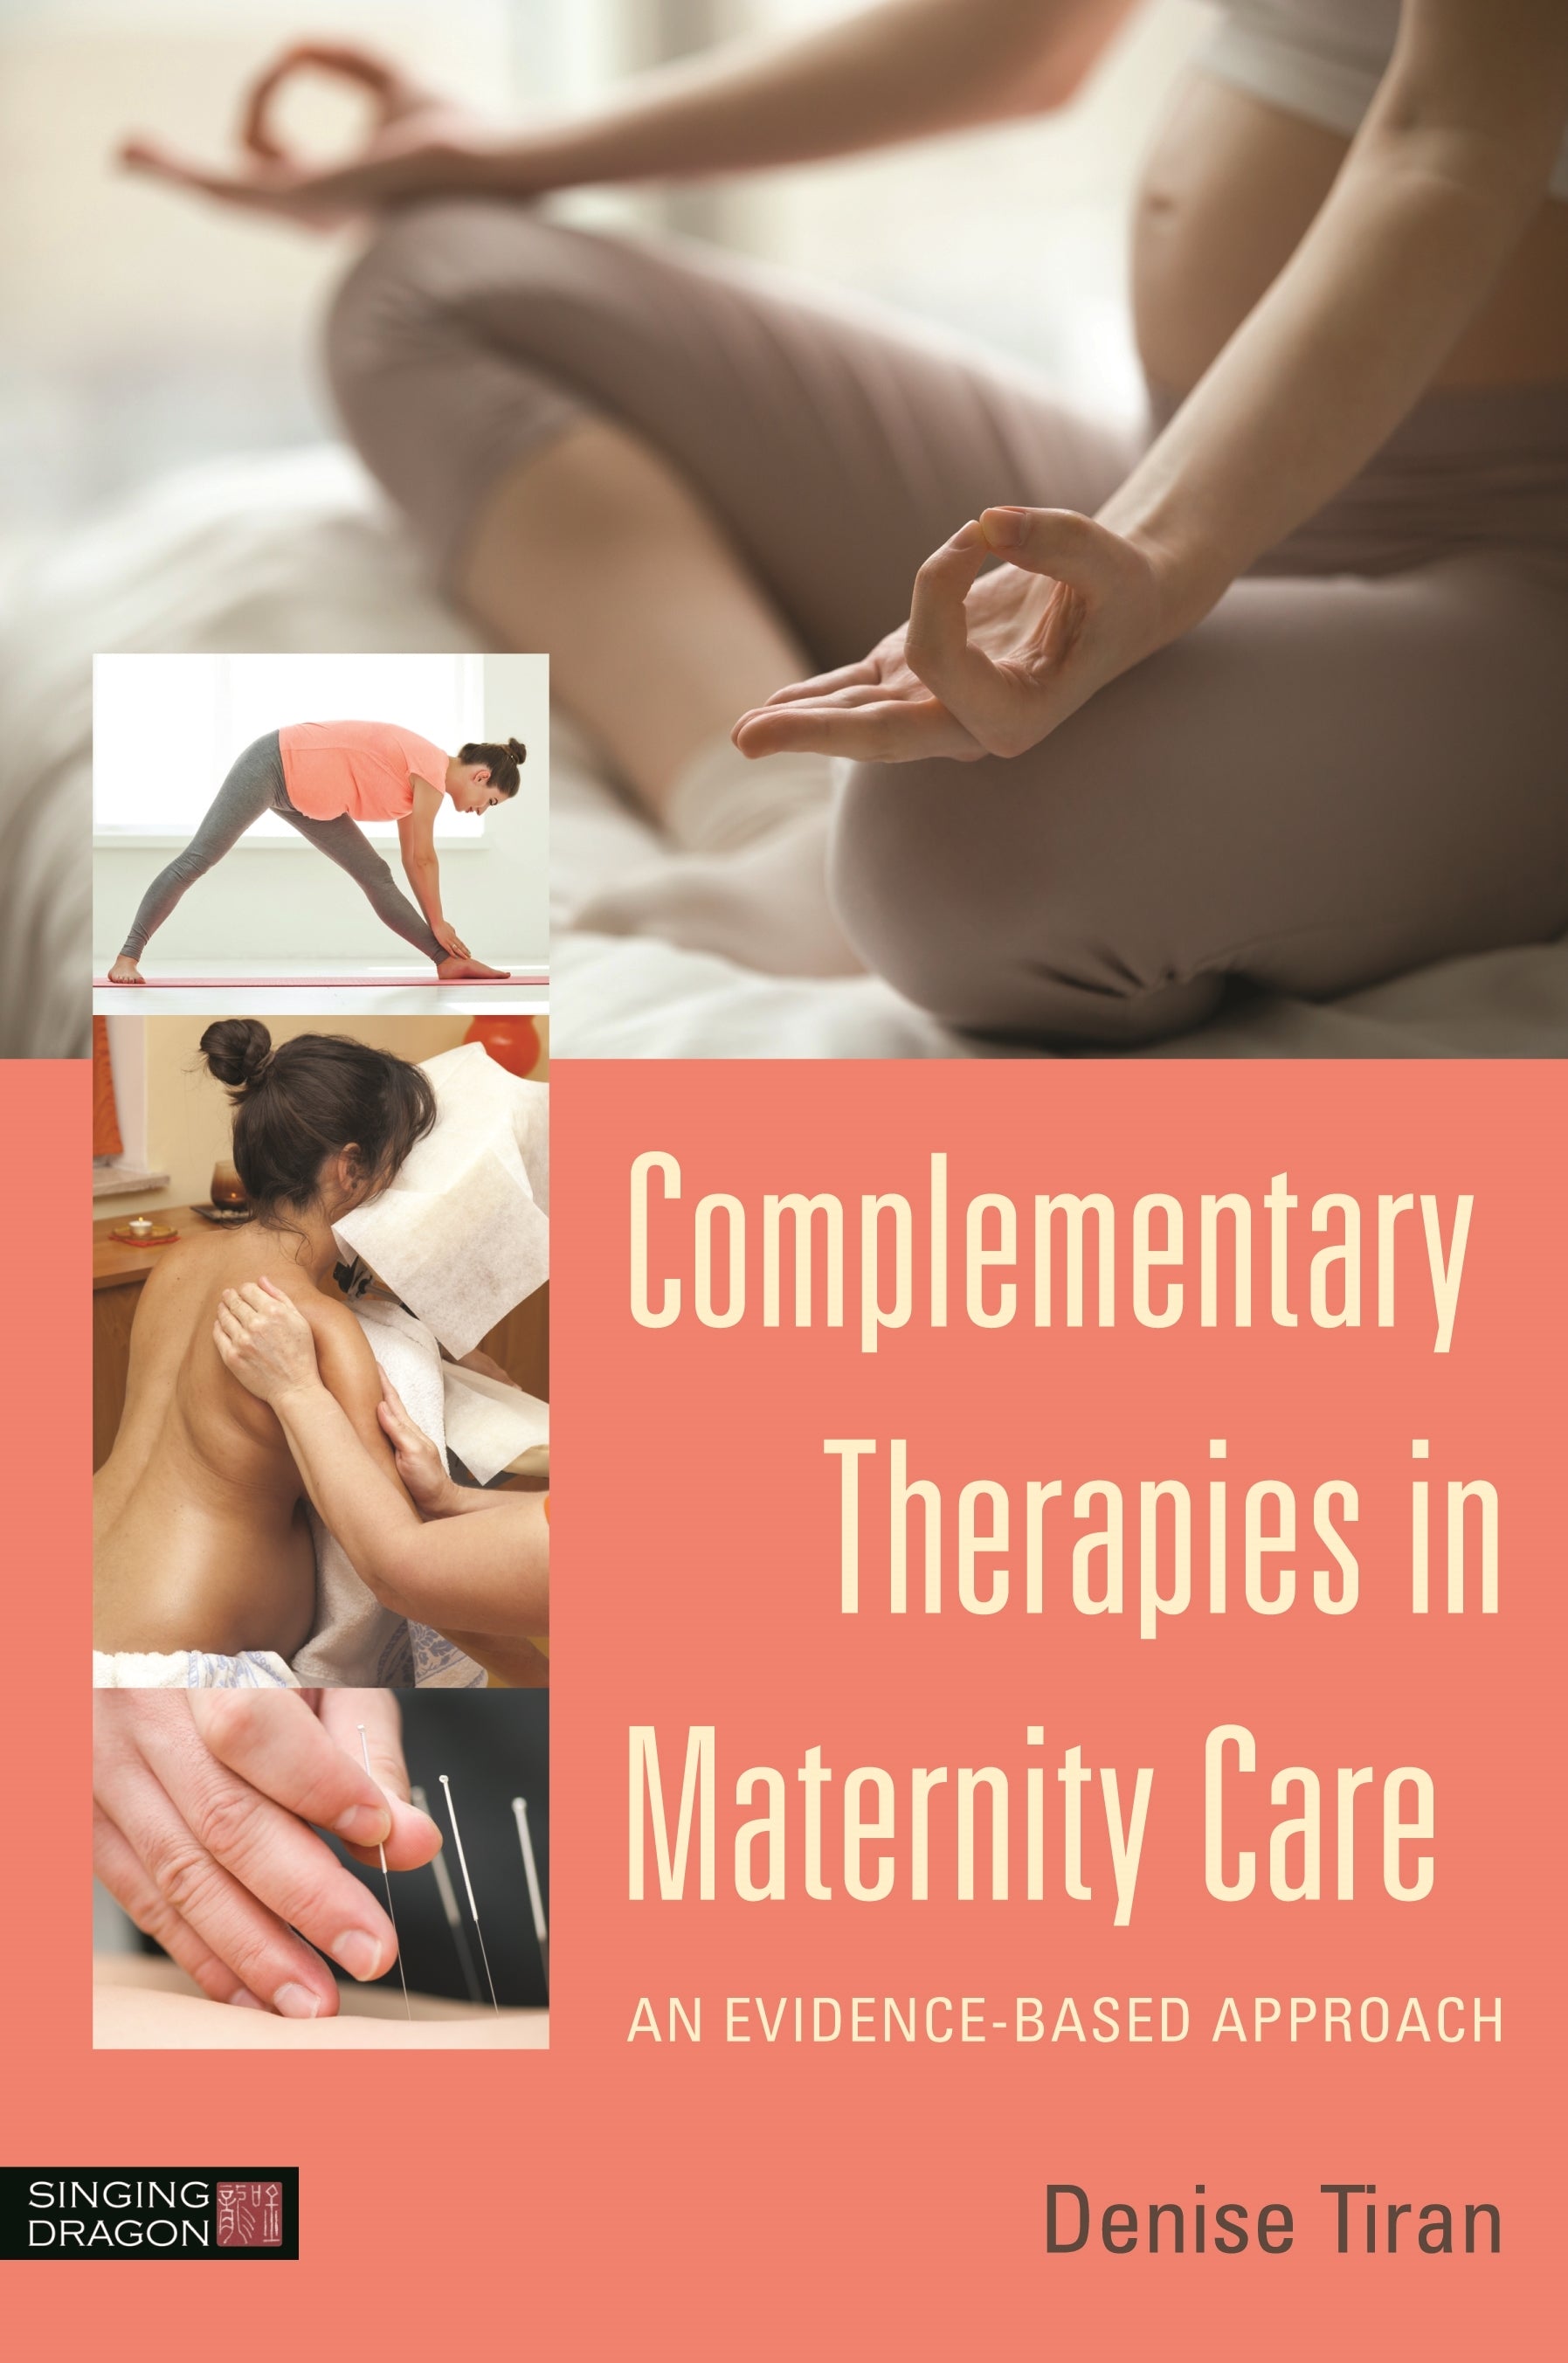 Complementary Therapies in Maternity Care by Denise Tiran